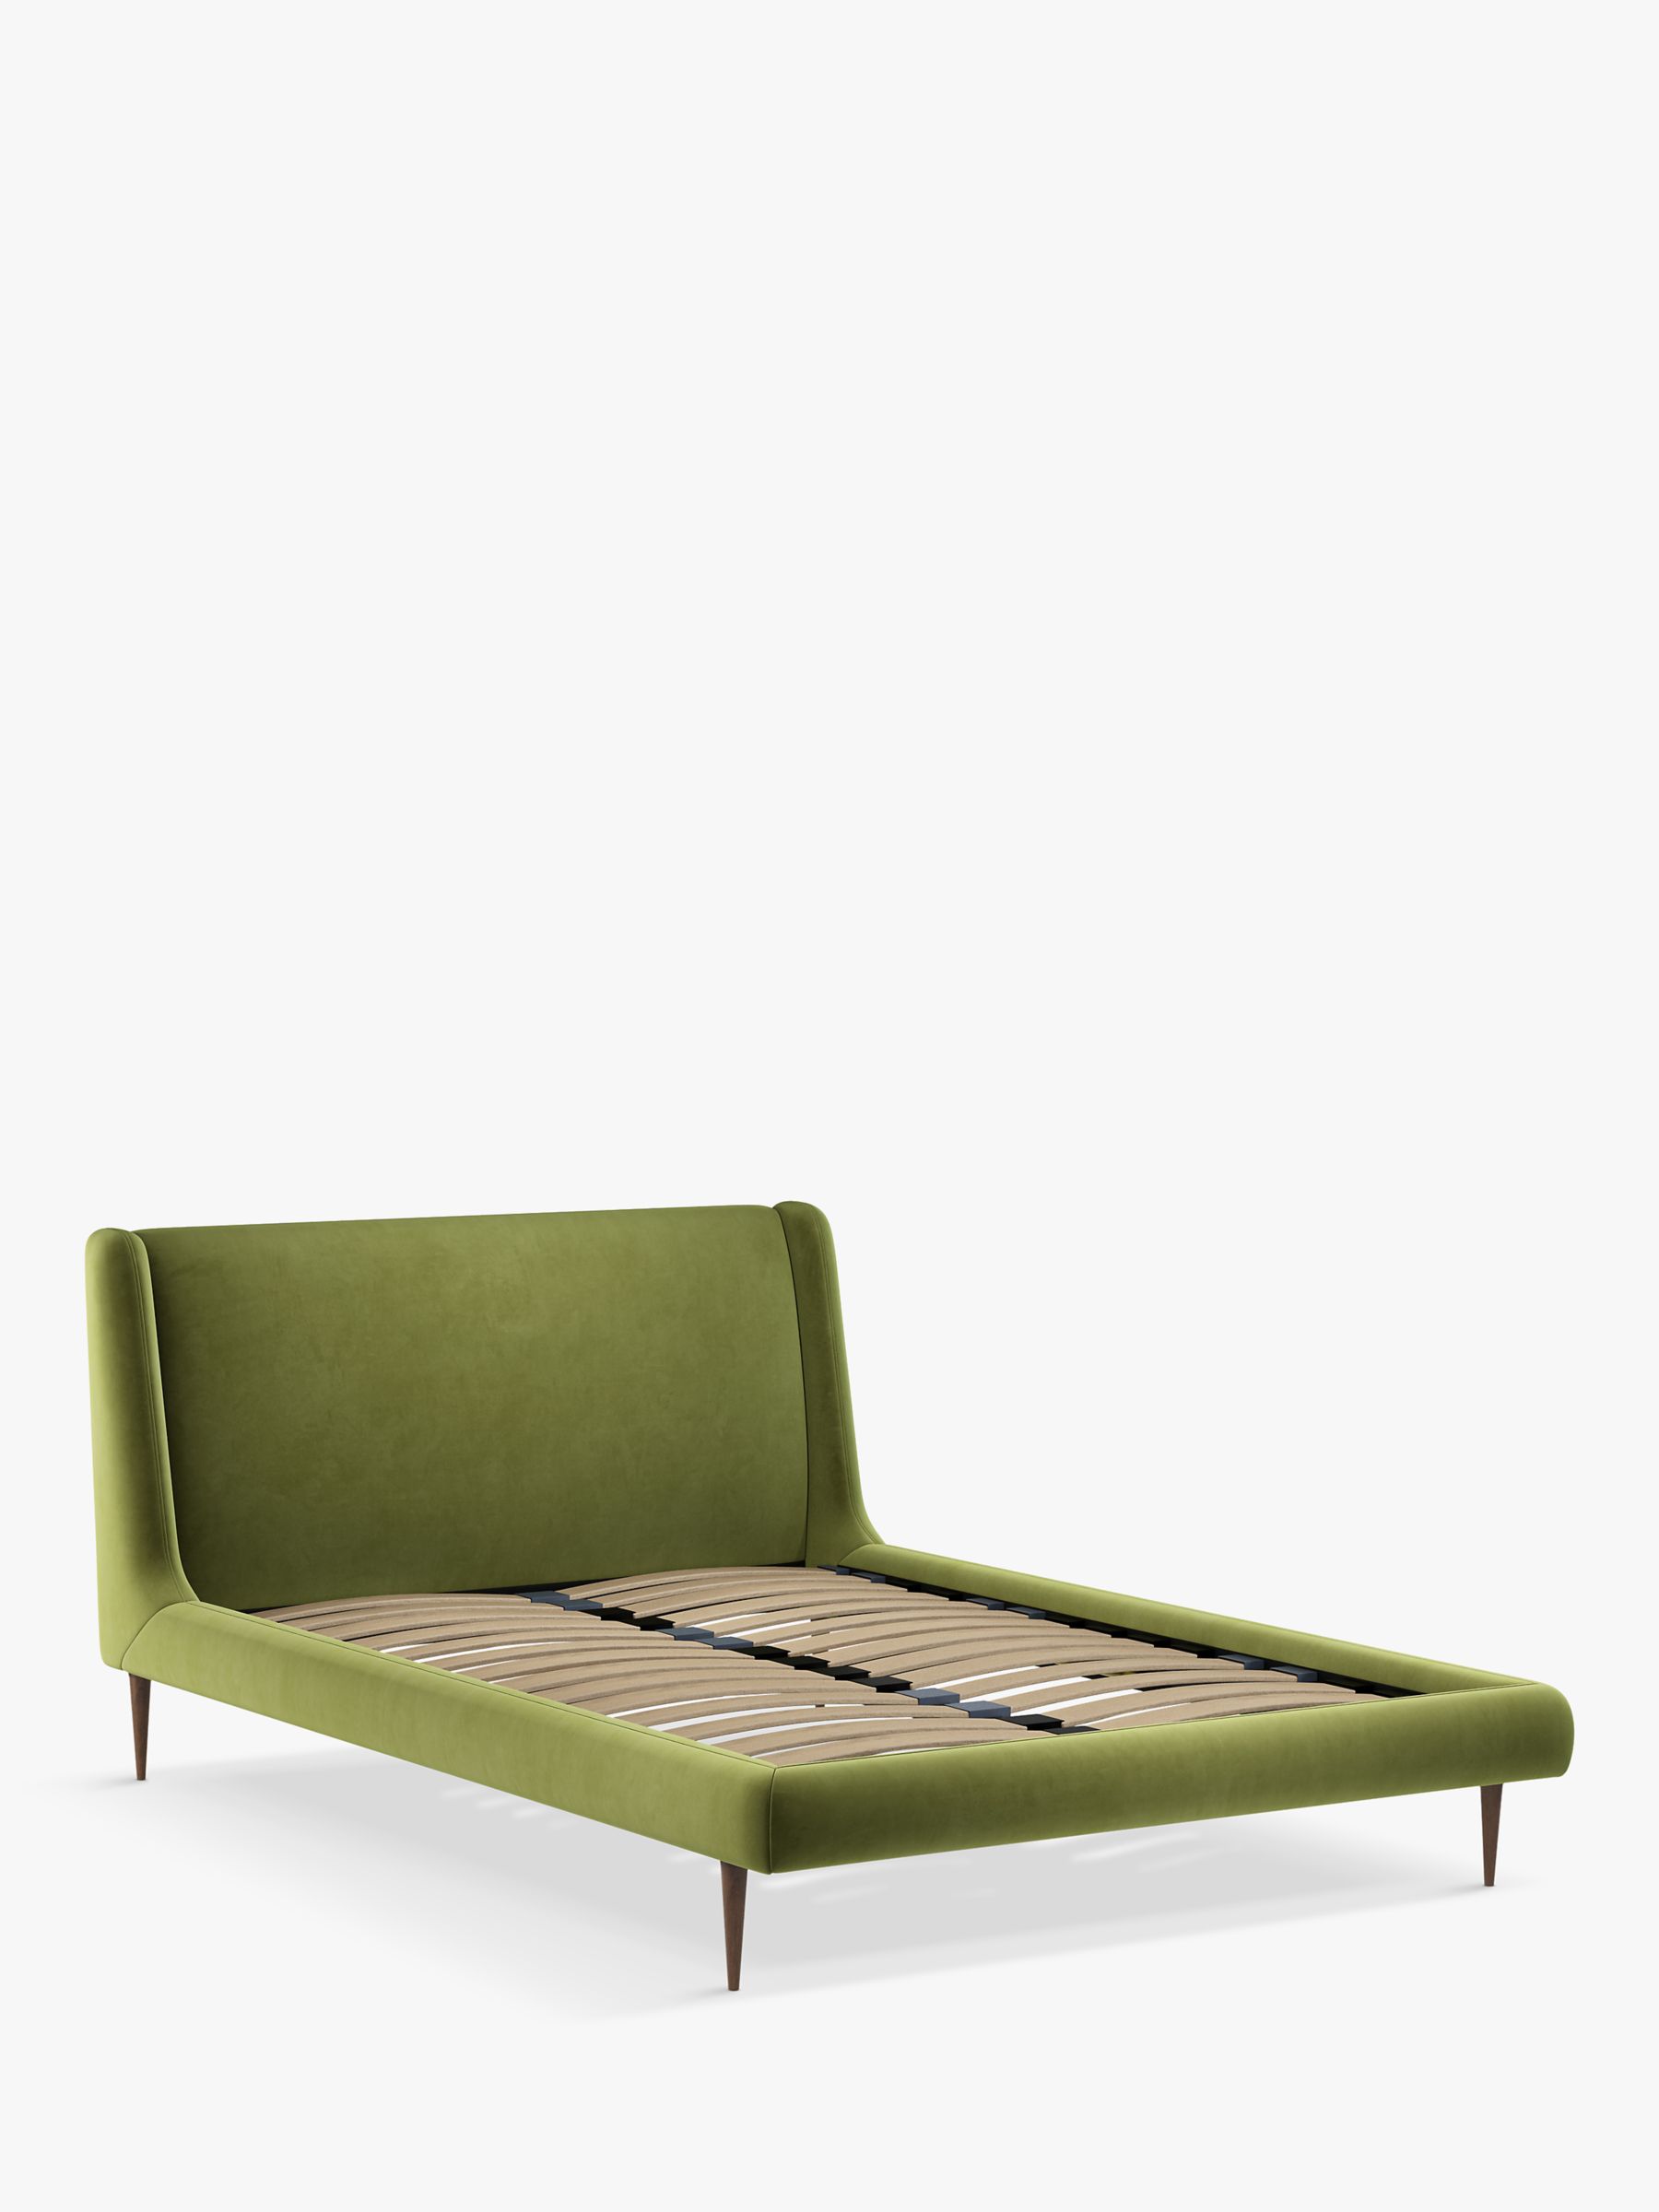 Photo of John lewis mid-century sweep upholstered bed frame king size